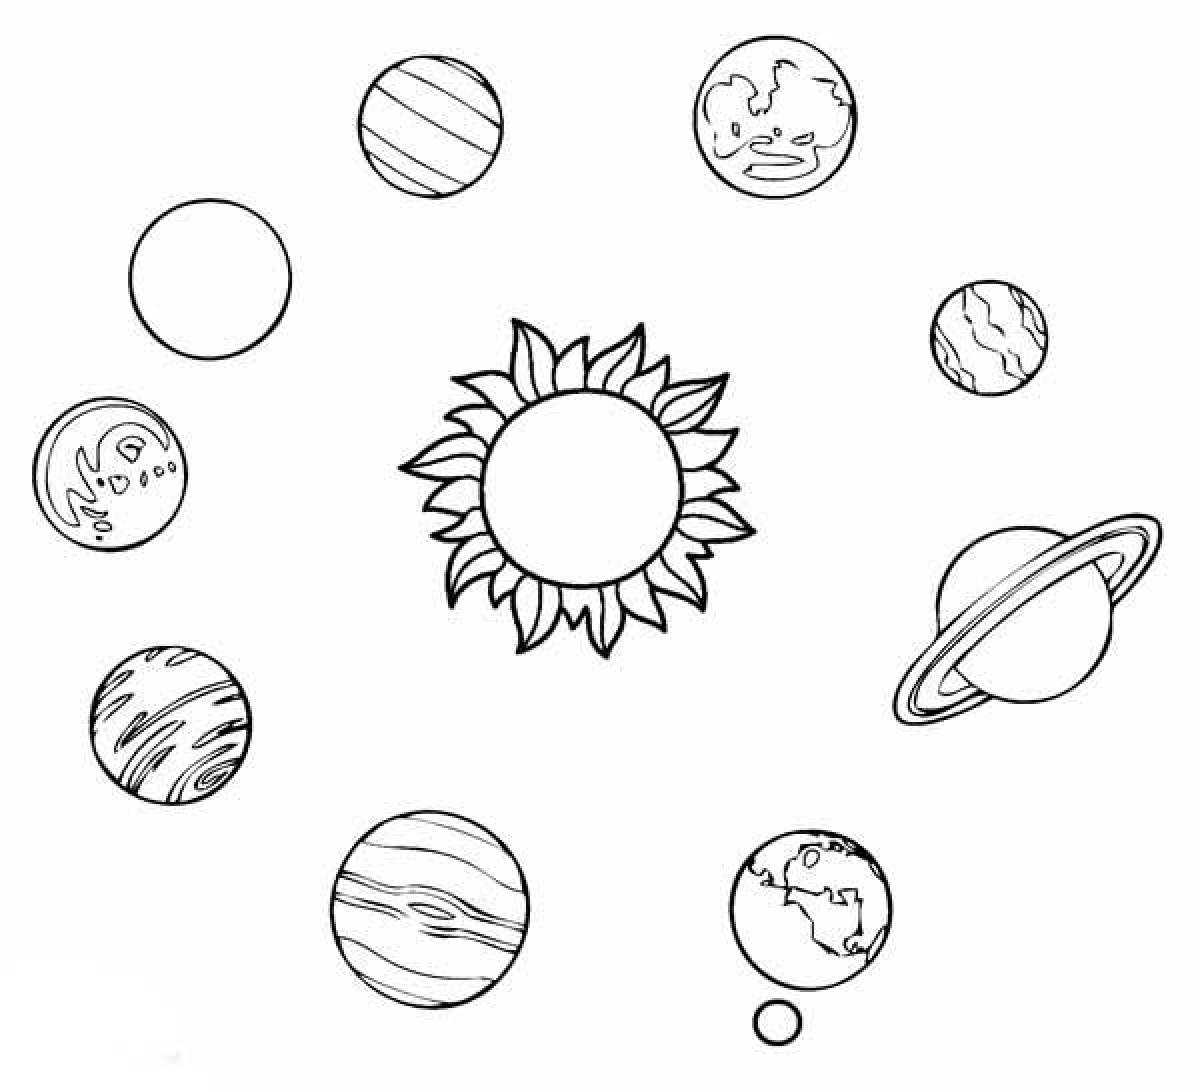 Solar system coloring page